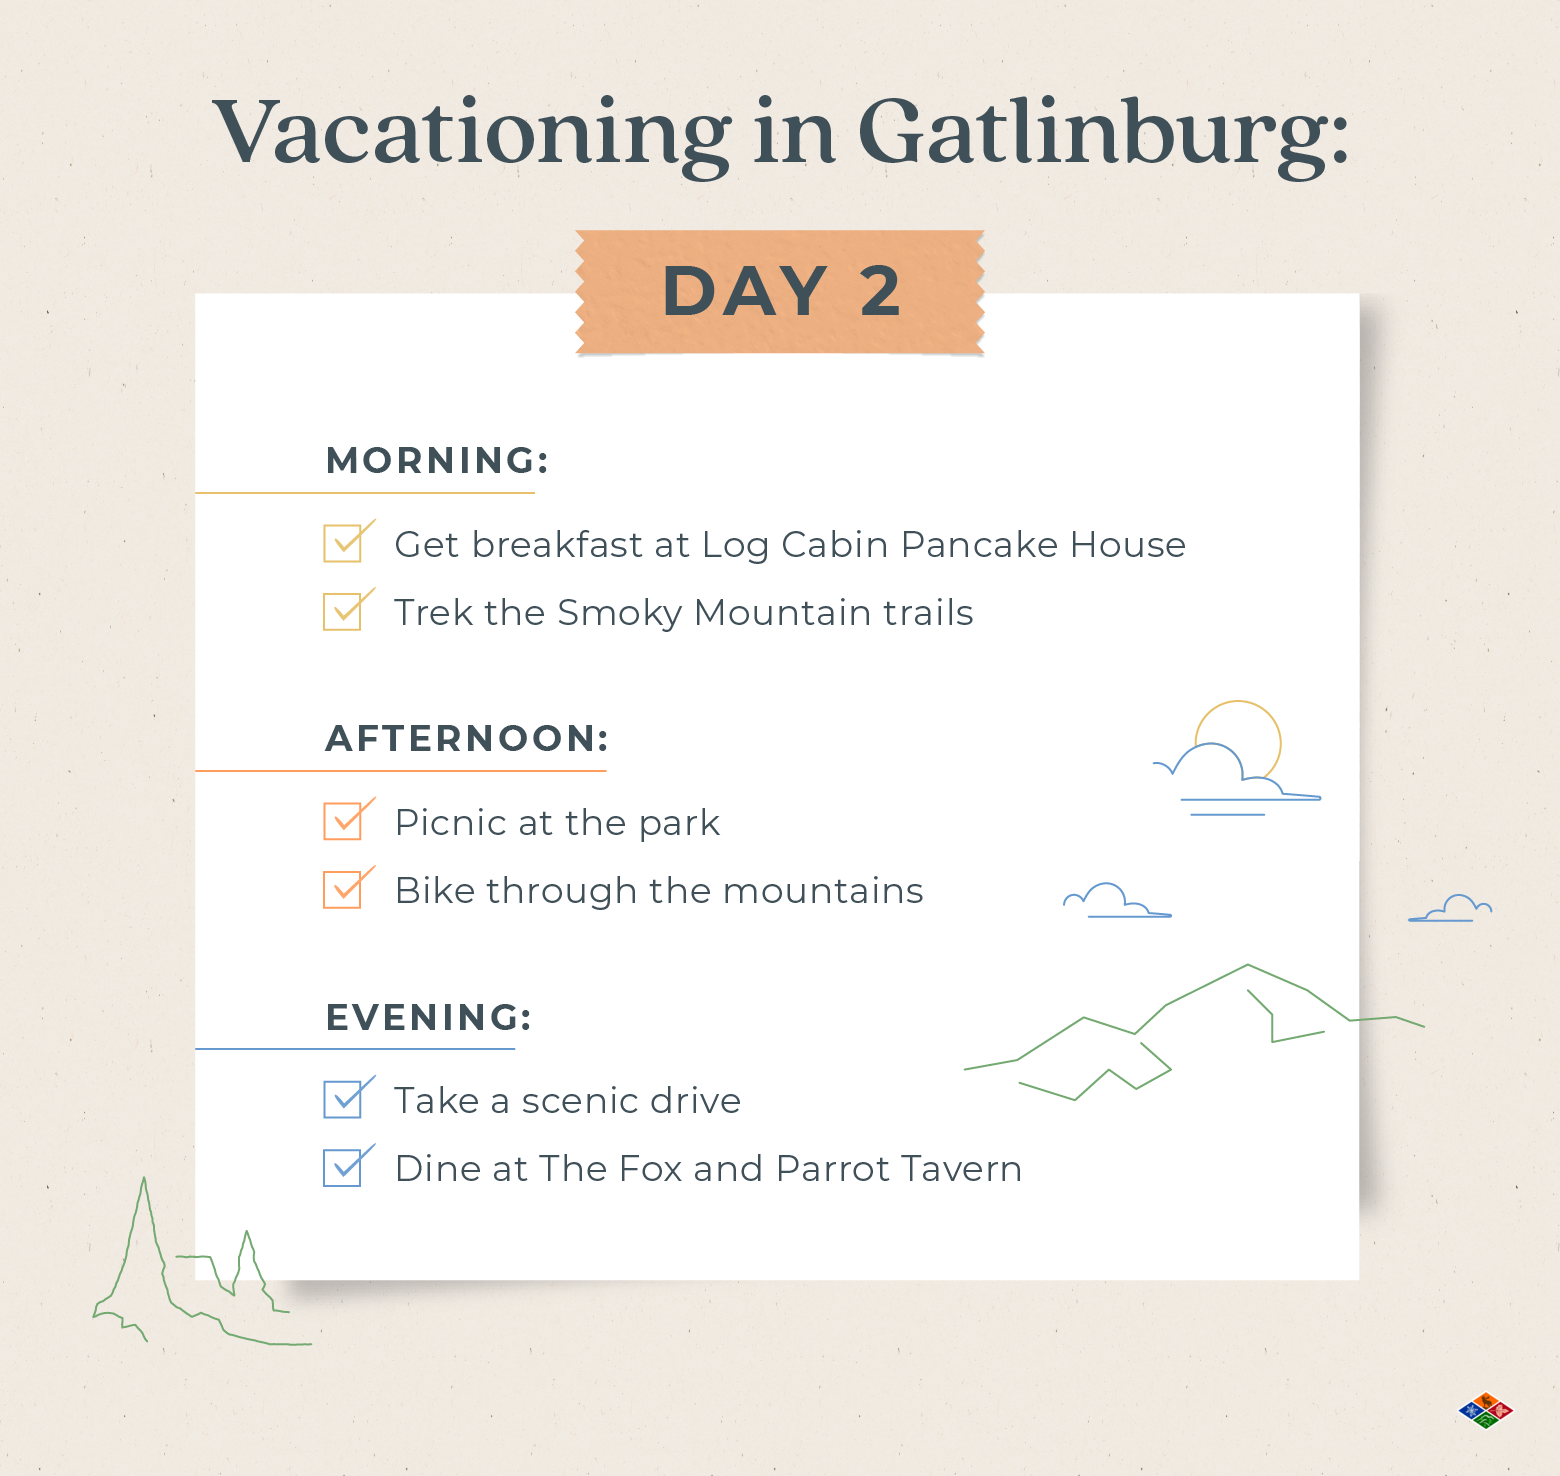 A graphic shows the day two itinerary for vacationing in Gatlinburg.